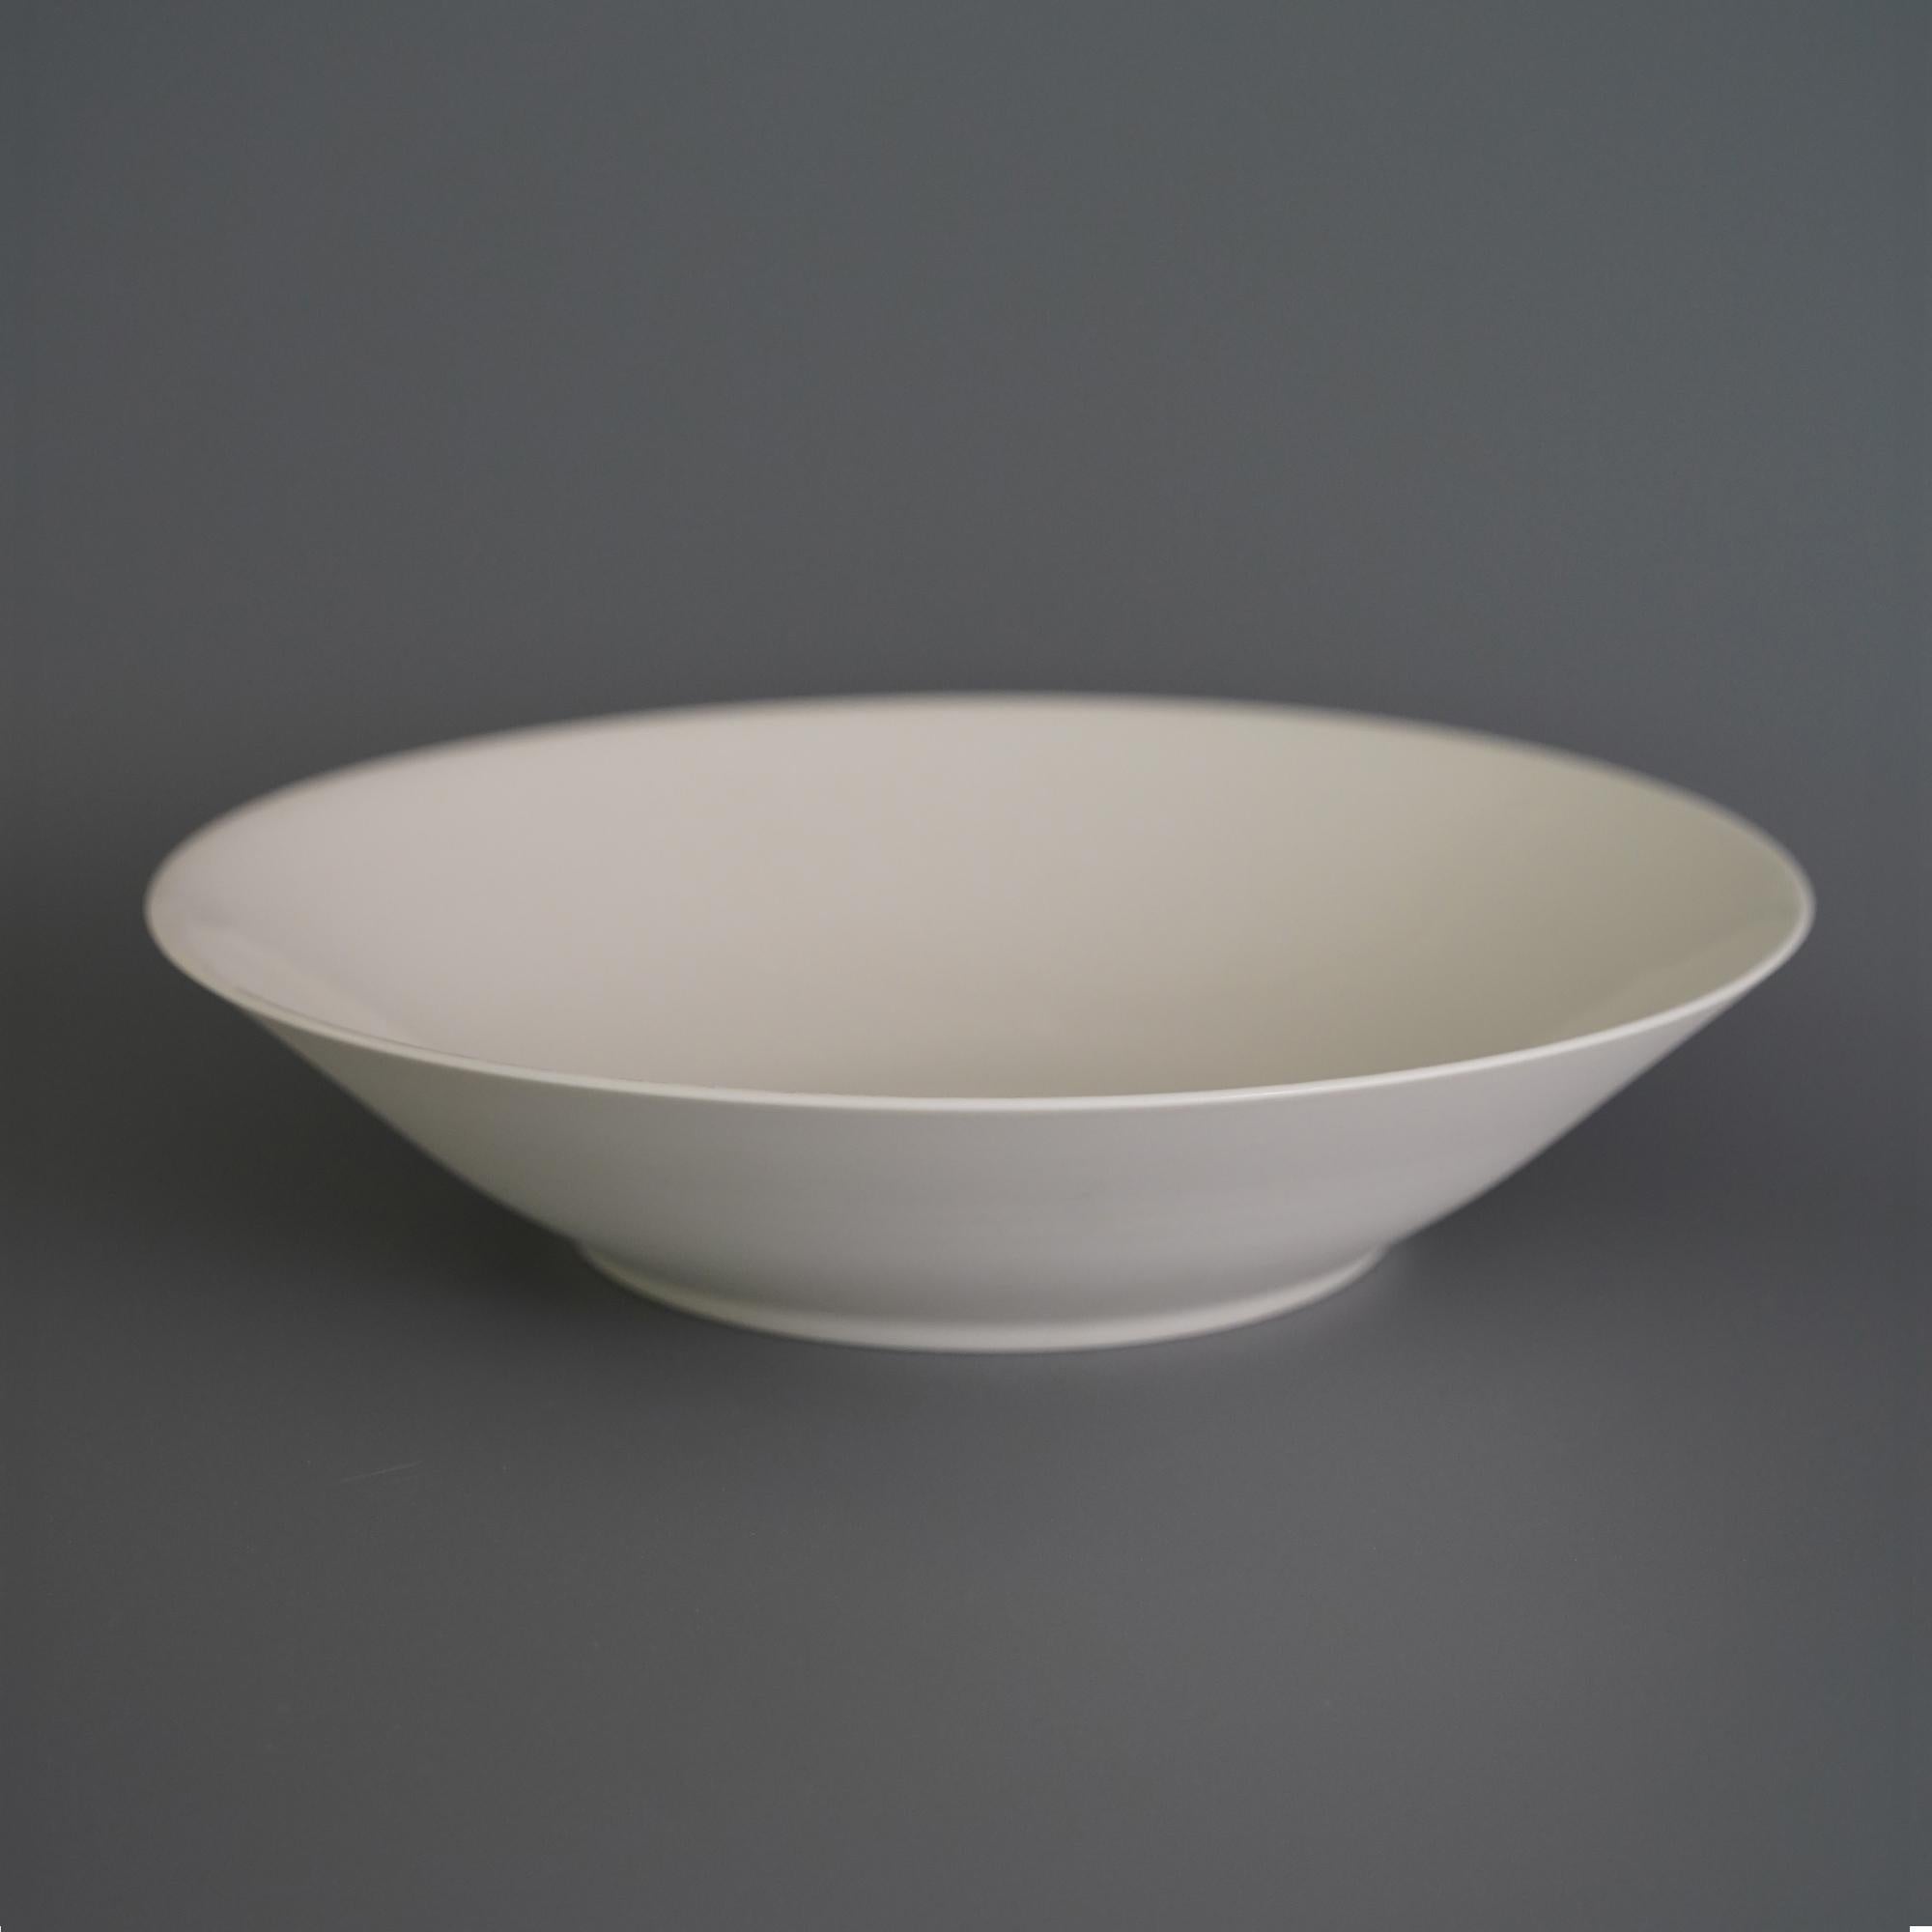 Plain fruit bowl by Studio Cúze
Dimensions: W 29 x H 6.5 cm
Materials: ceramic

A unique bowl that brightens up your room and knows how to present your fruit in an inimitable way. The bowl is completely white and comes with a baby smooth finish.